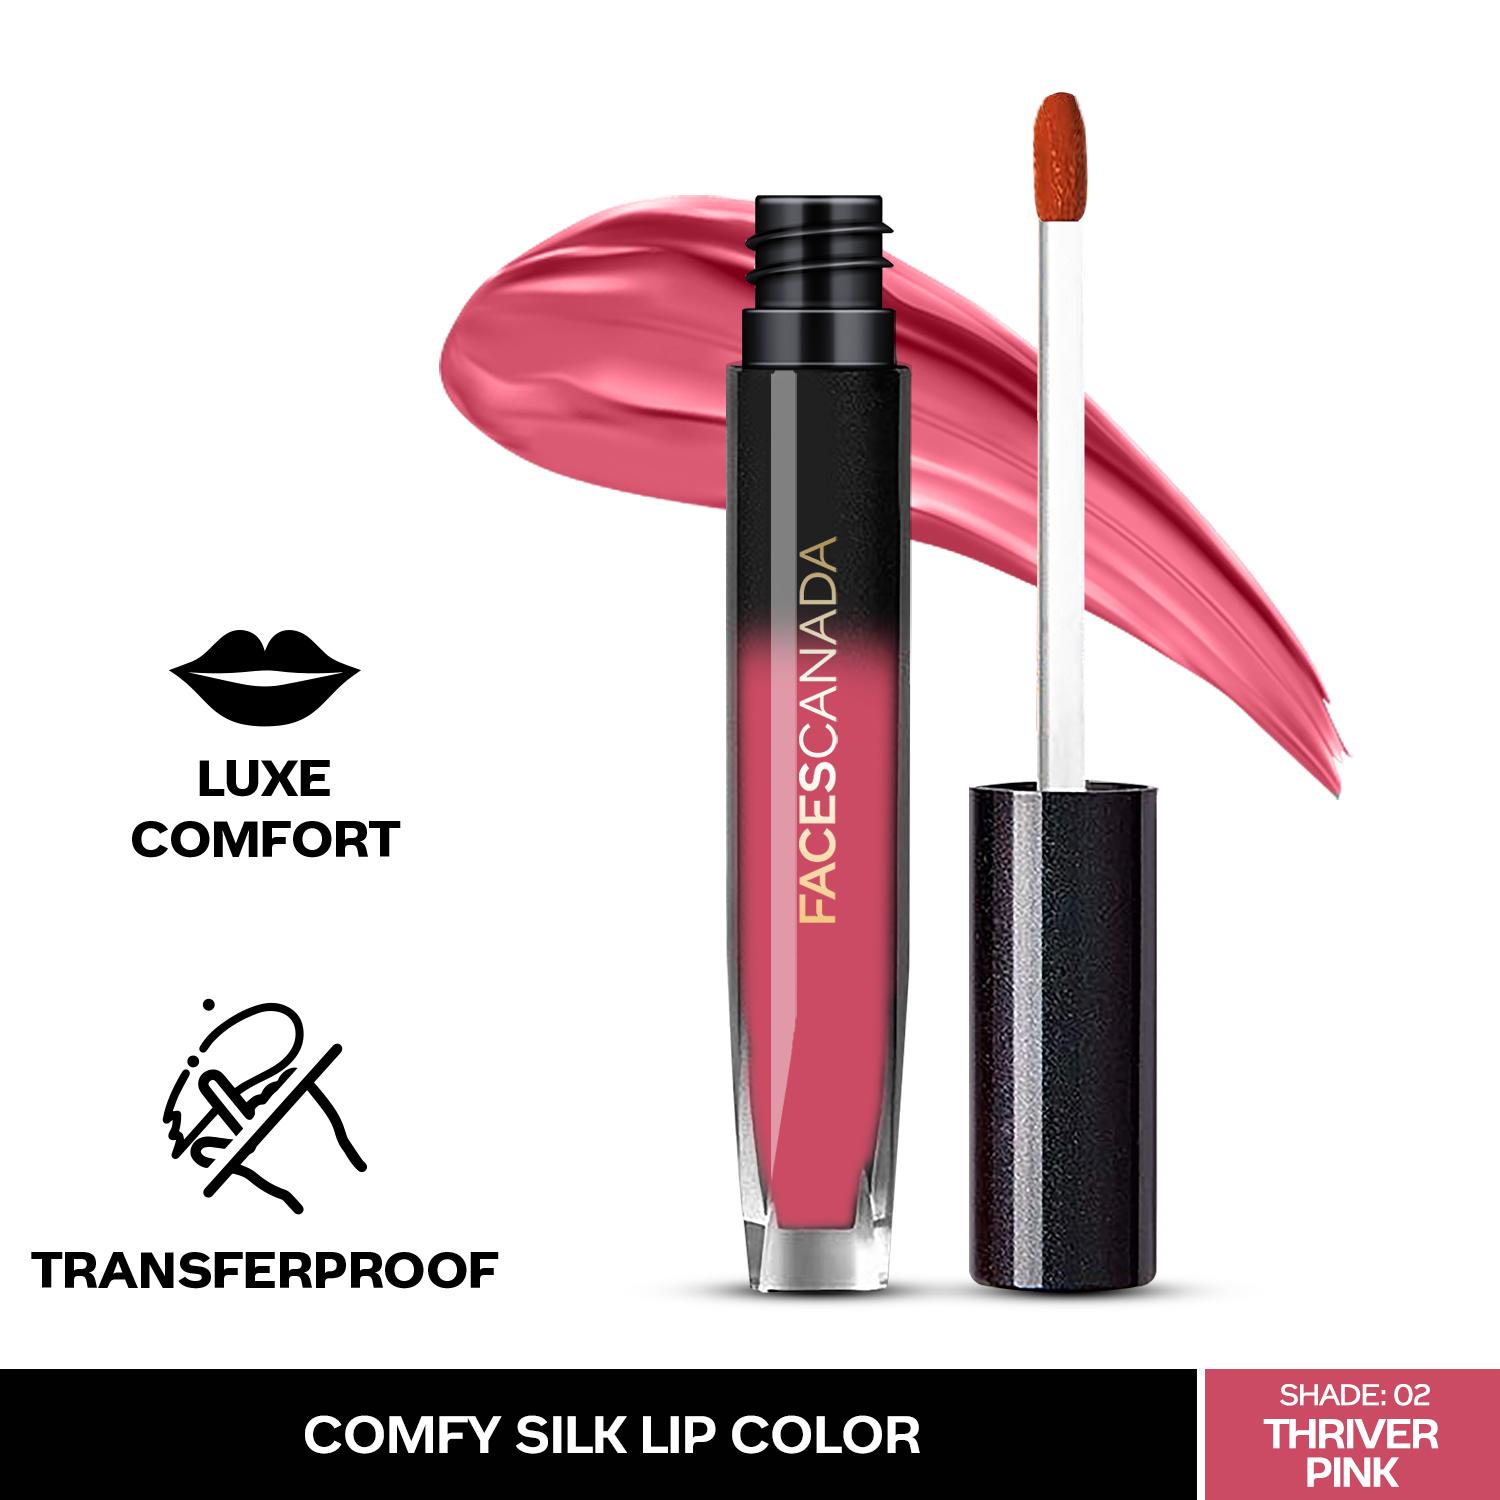 Faces Canada | Faces Canada Comfy Silk Lip Color I Mulberry Oil, Luxe Comfort, No Dryness I Thriver Pink 02 (3 ml)